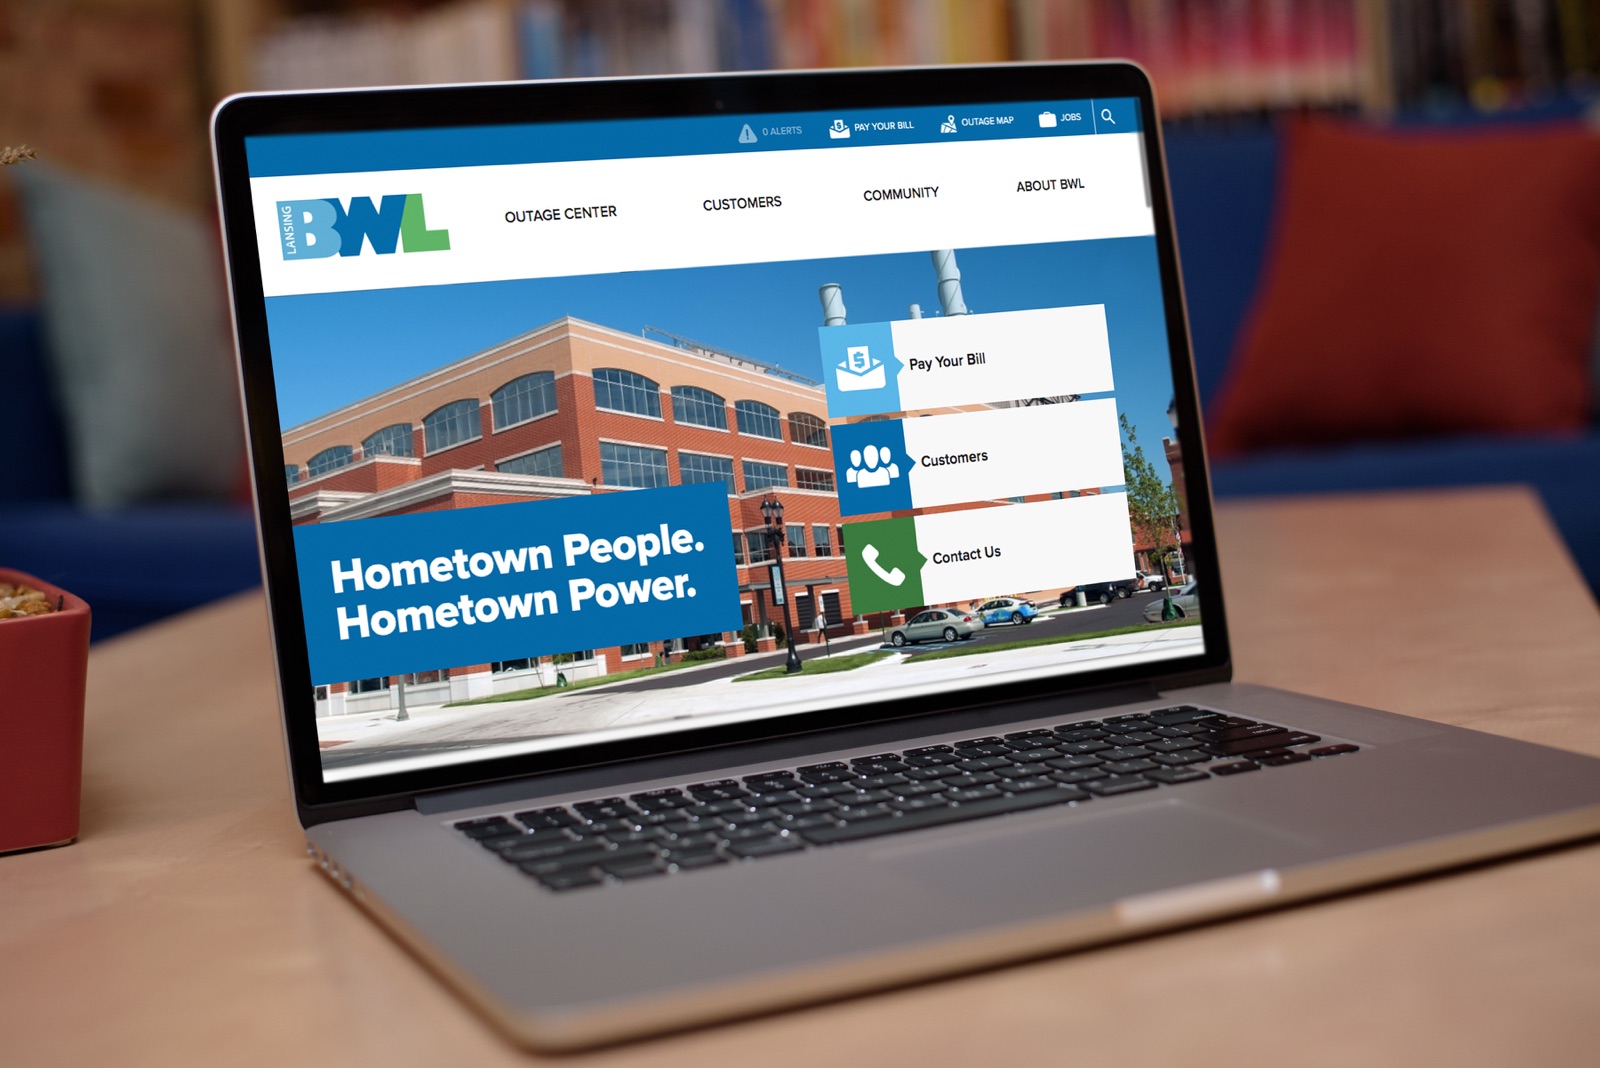 The BWL website homepage on a laptop